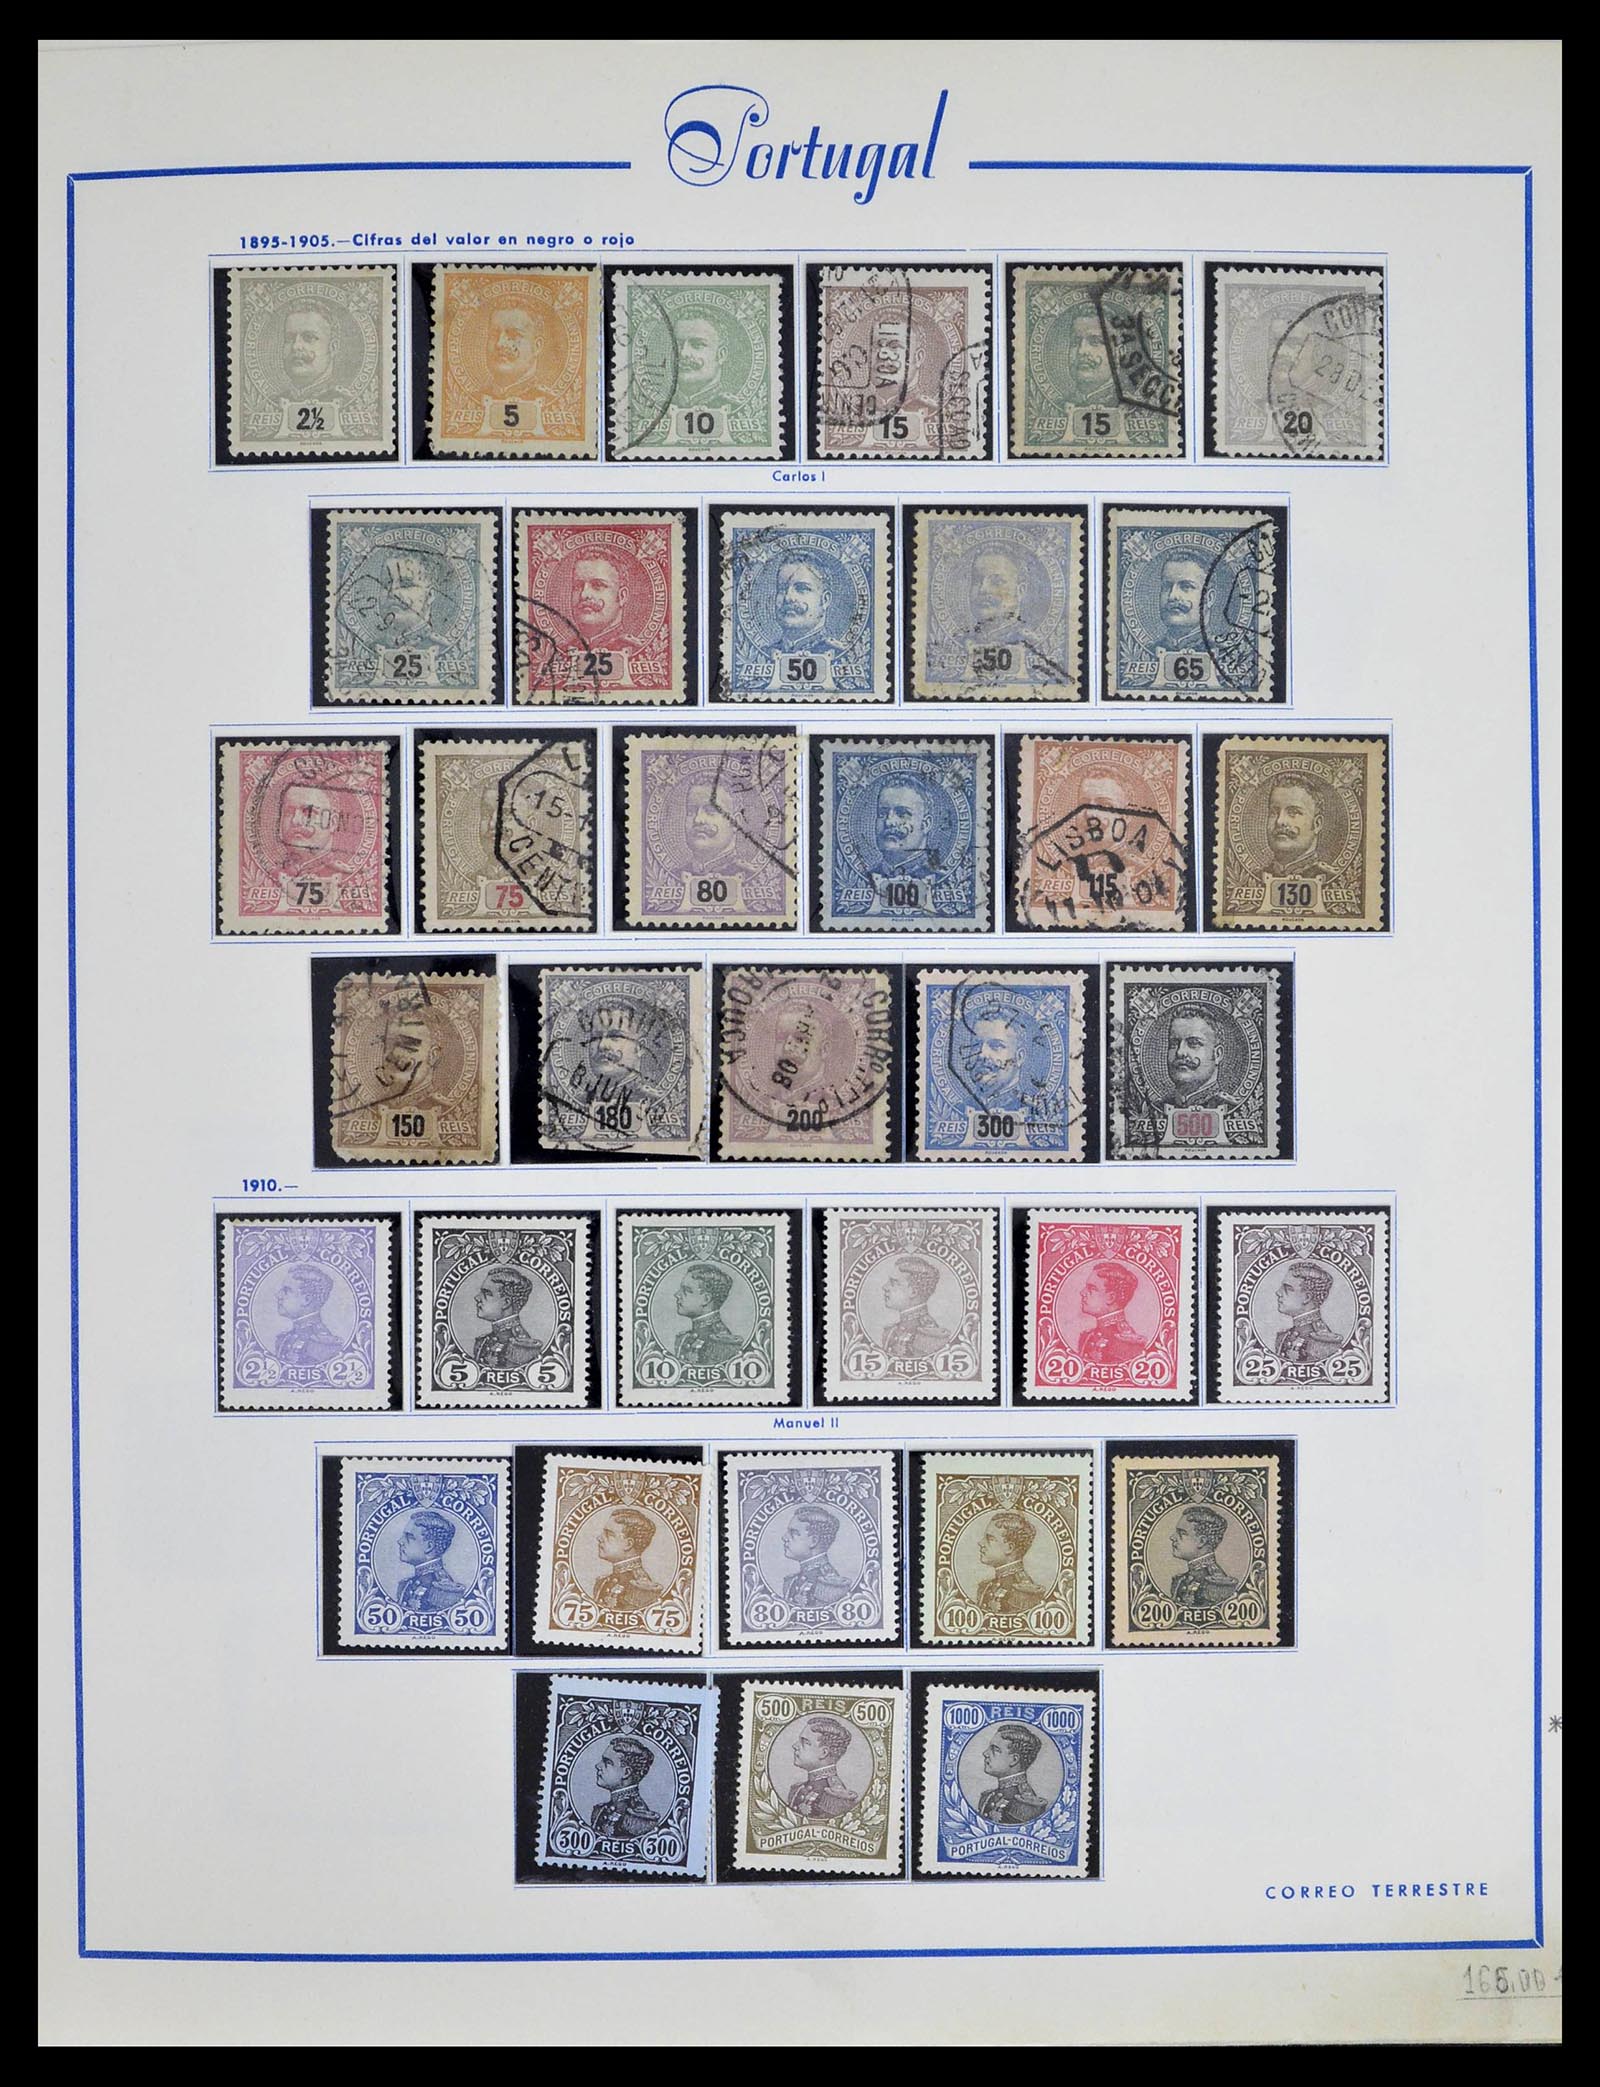 39233 0008 - Stamp collection 39233 Portugal 1853-1978.